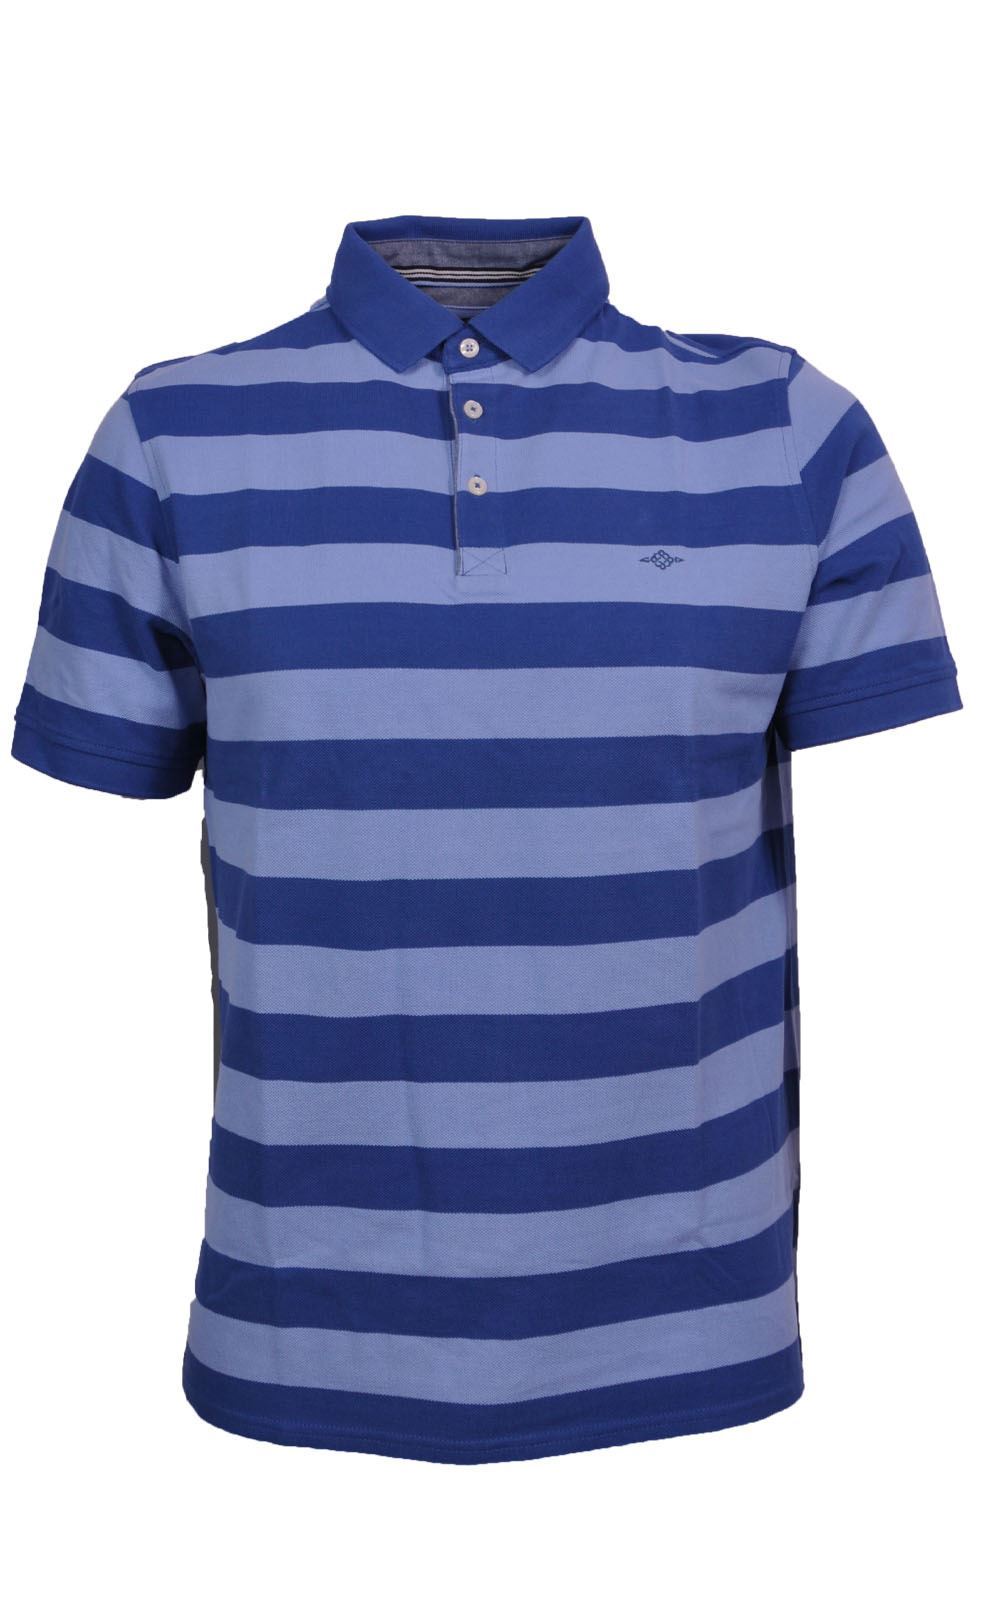 Picture of Baileys Polo Shirt 315208